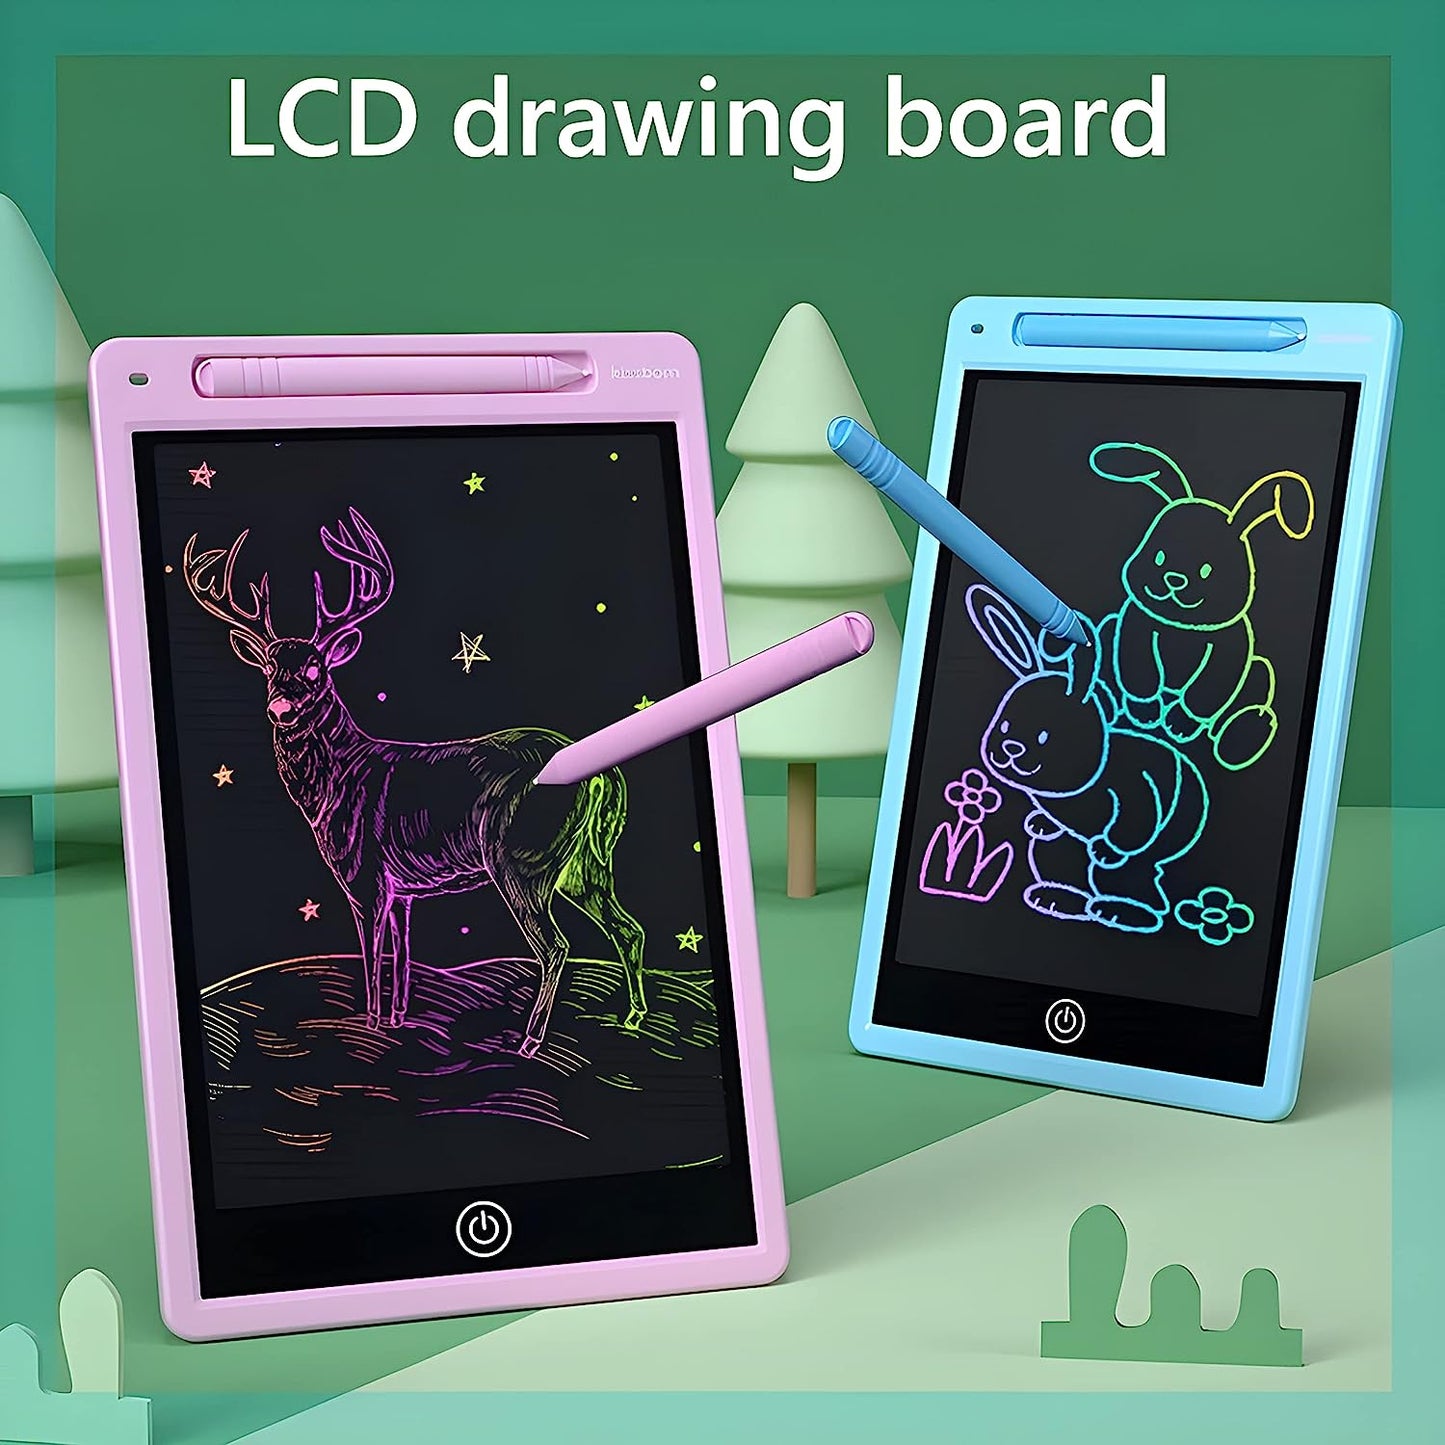 2 Pack New LCD Writing Tablet Drawing Writing Board Erasable Doodle Pad Toy for Kids Learning Education 8.5 inch Blue and Pink